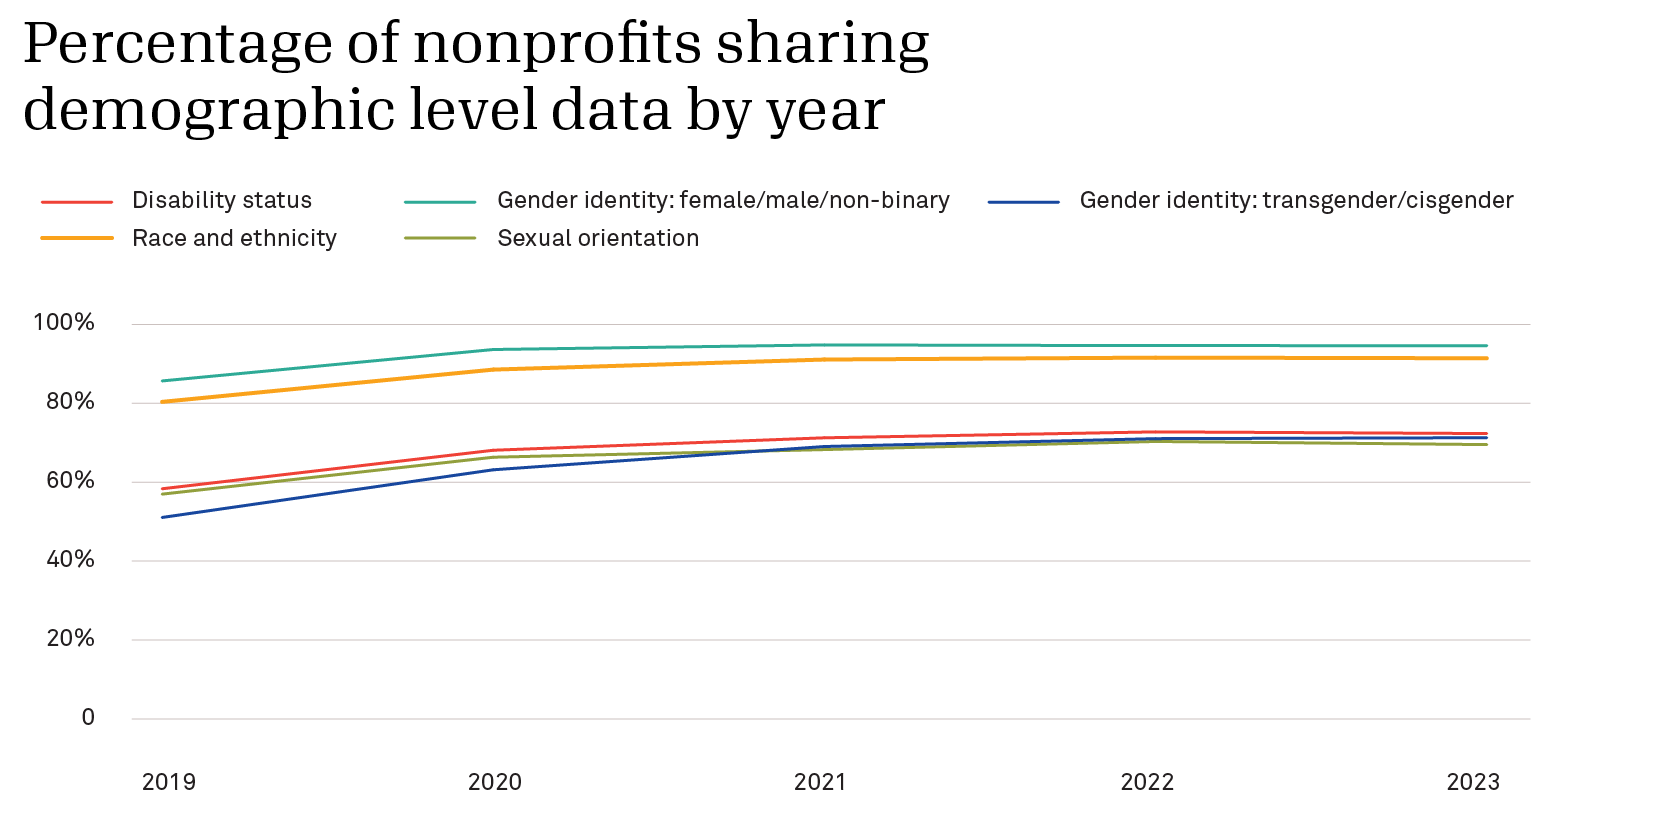 Line graph with percentage of nonprofits sharing demographic level data by year. Disability status and sexual orientation are shared by ~60% of nonprofits in 2019 to ~70% in 2023. Race and ethnicity is shared by ~80% of nonprofits in 2019 to ~90% in 2023. Gender identity (female/male/non-binary) is shared by ~85% of nonprofits in 2019 to ~95% in 2023. Gender identity (transgender/cisgender) is shared by ~50% of nonprofits in 2019 to ~70% in 2023. 